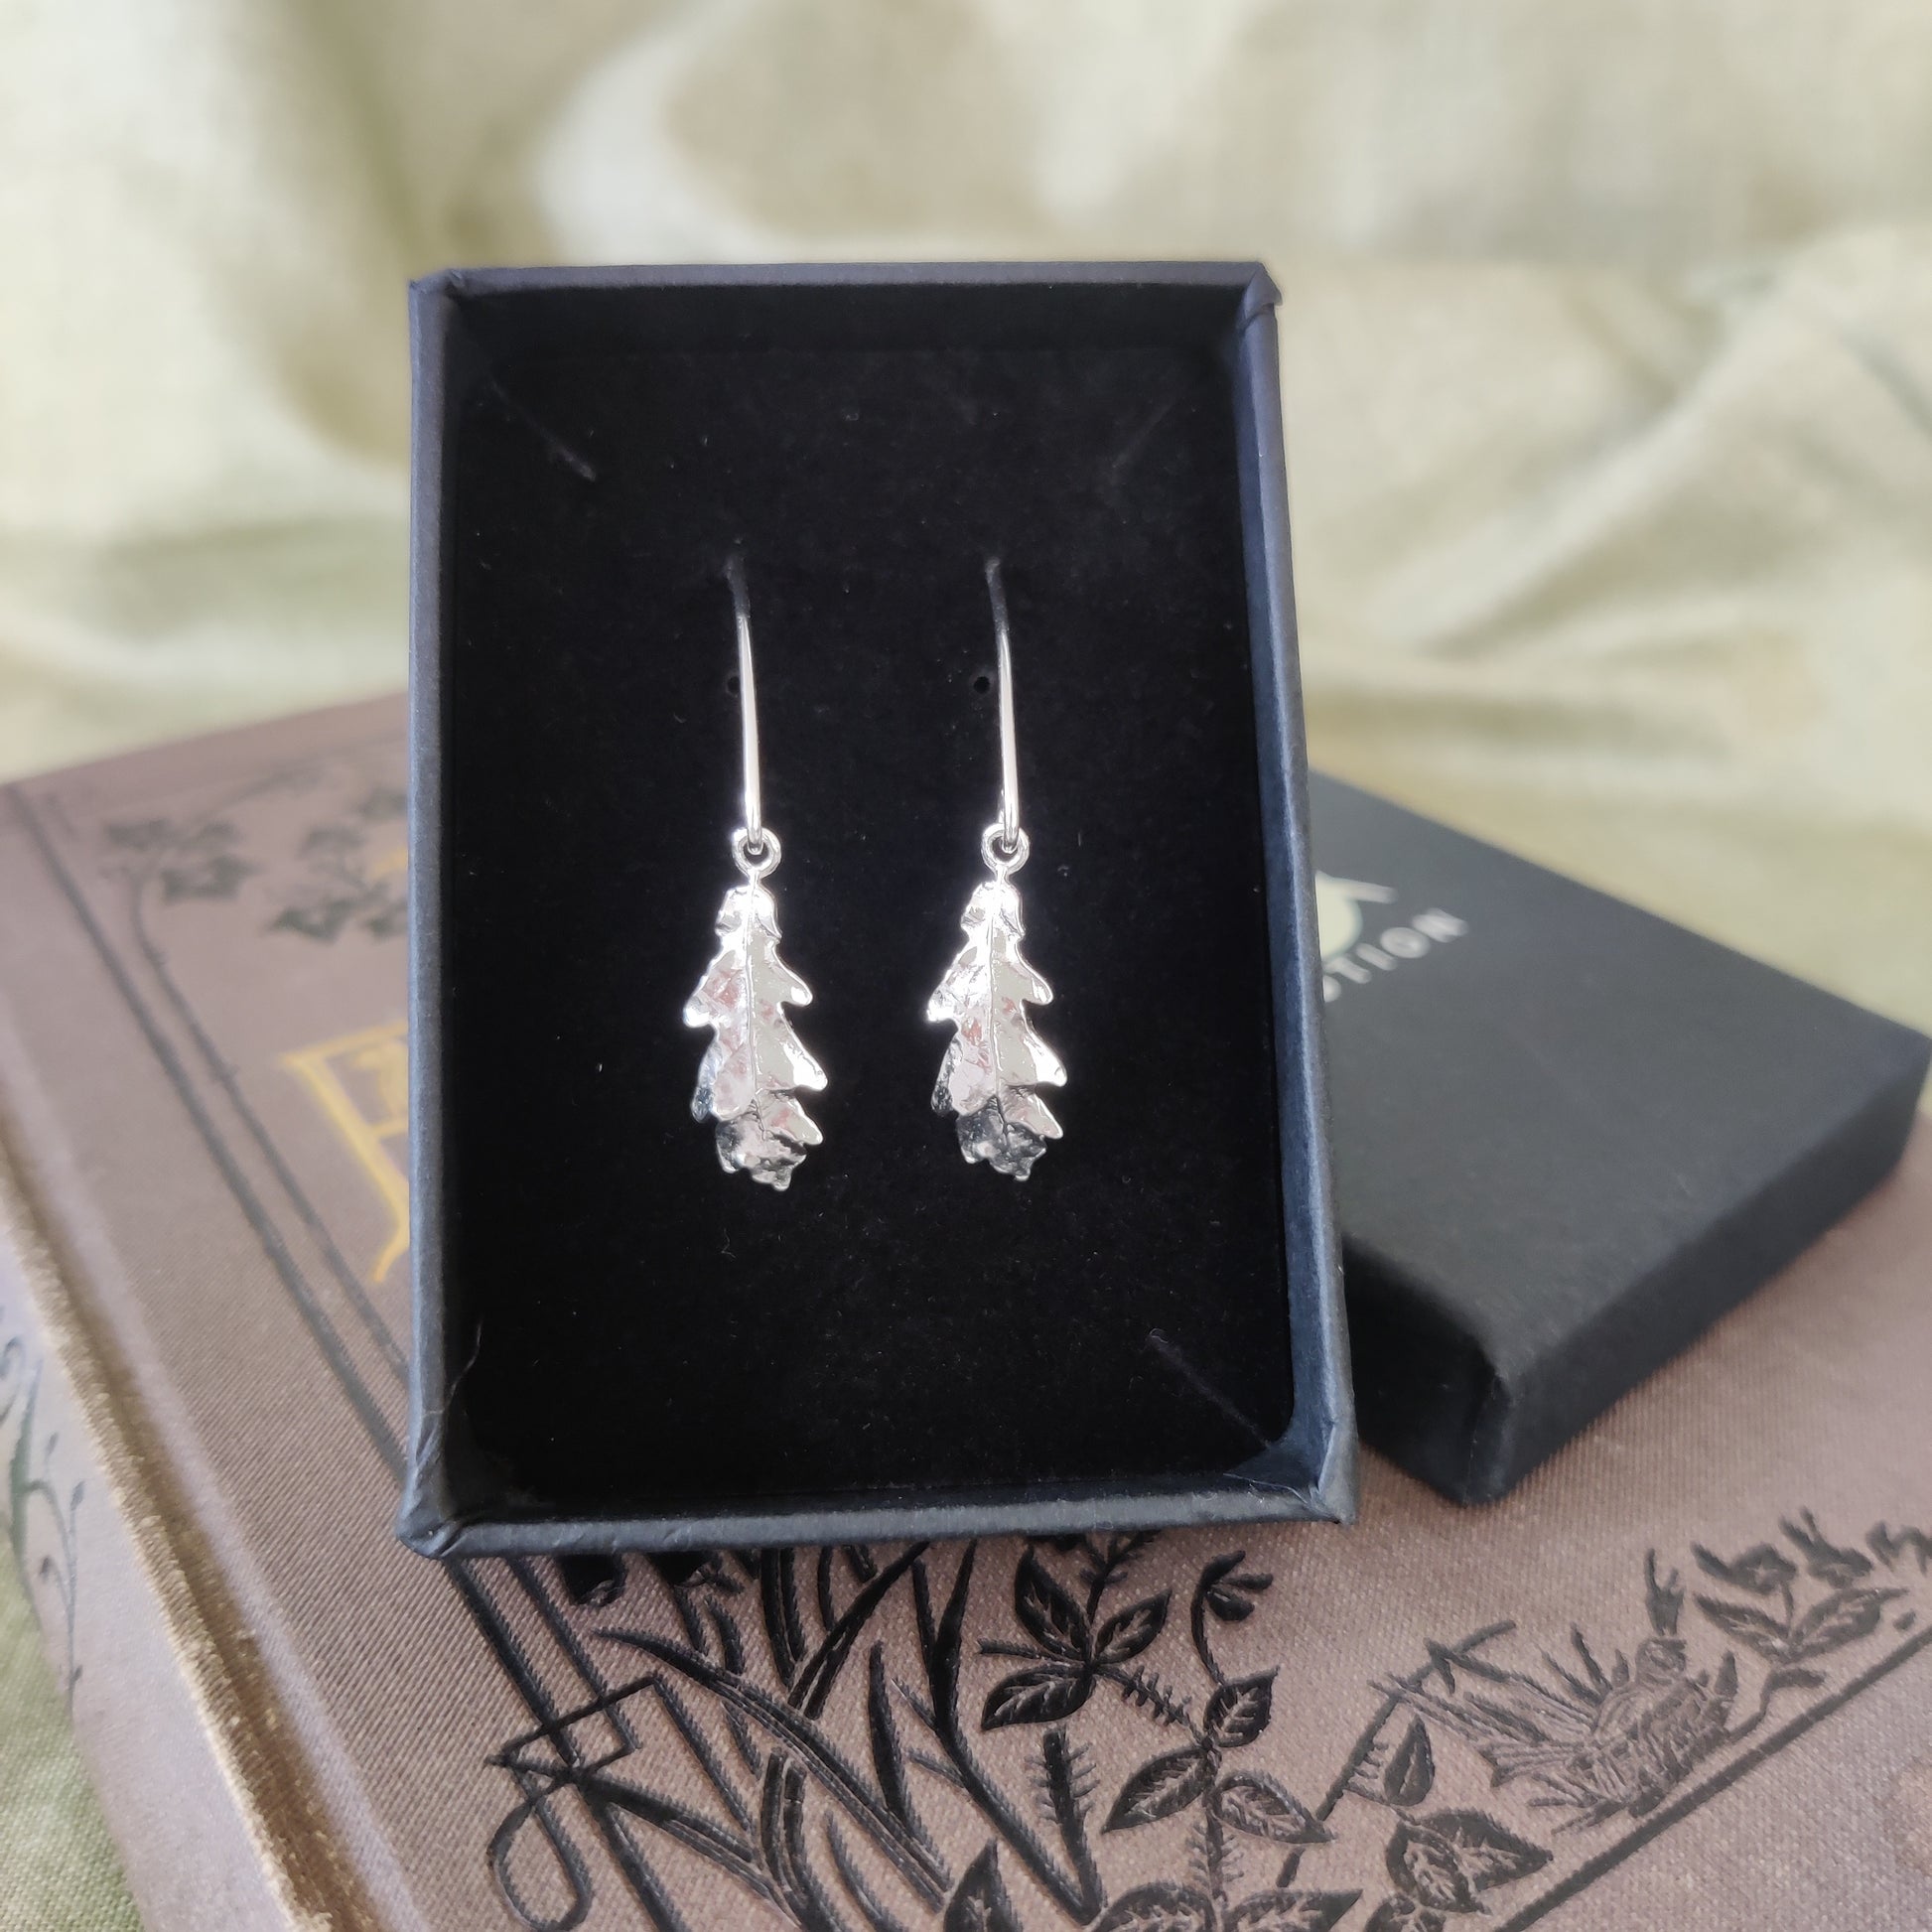 Real leaf earrings handcrafted in 925 sterling silver